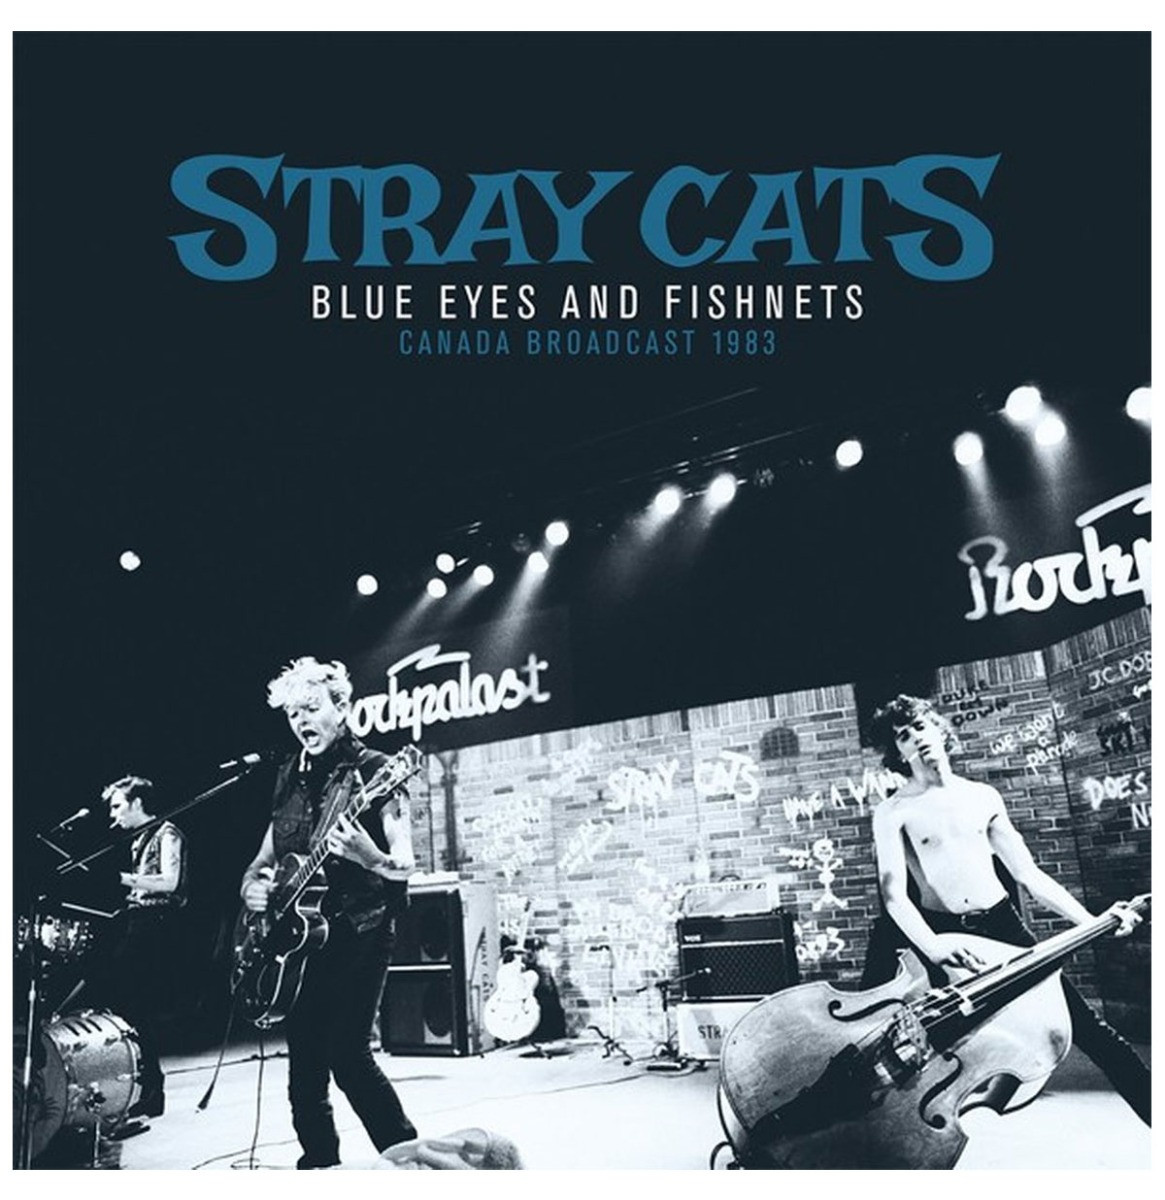 Stray Cats - Blue Eyes And Fishnets - Canada Broadcast 1983 - 2-LP